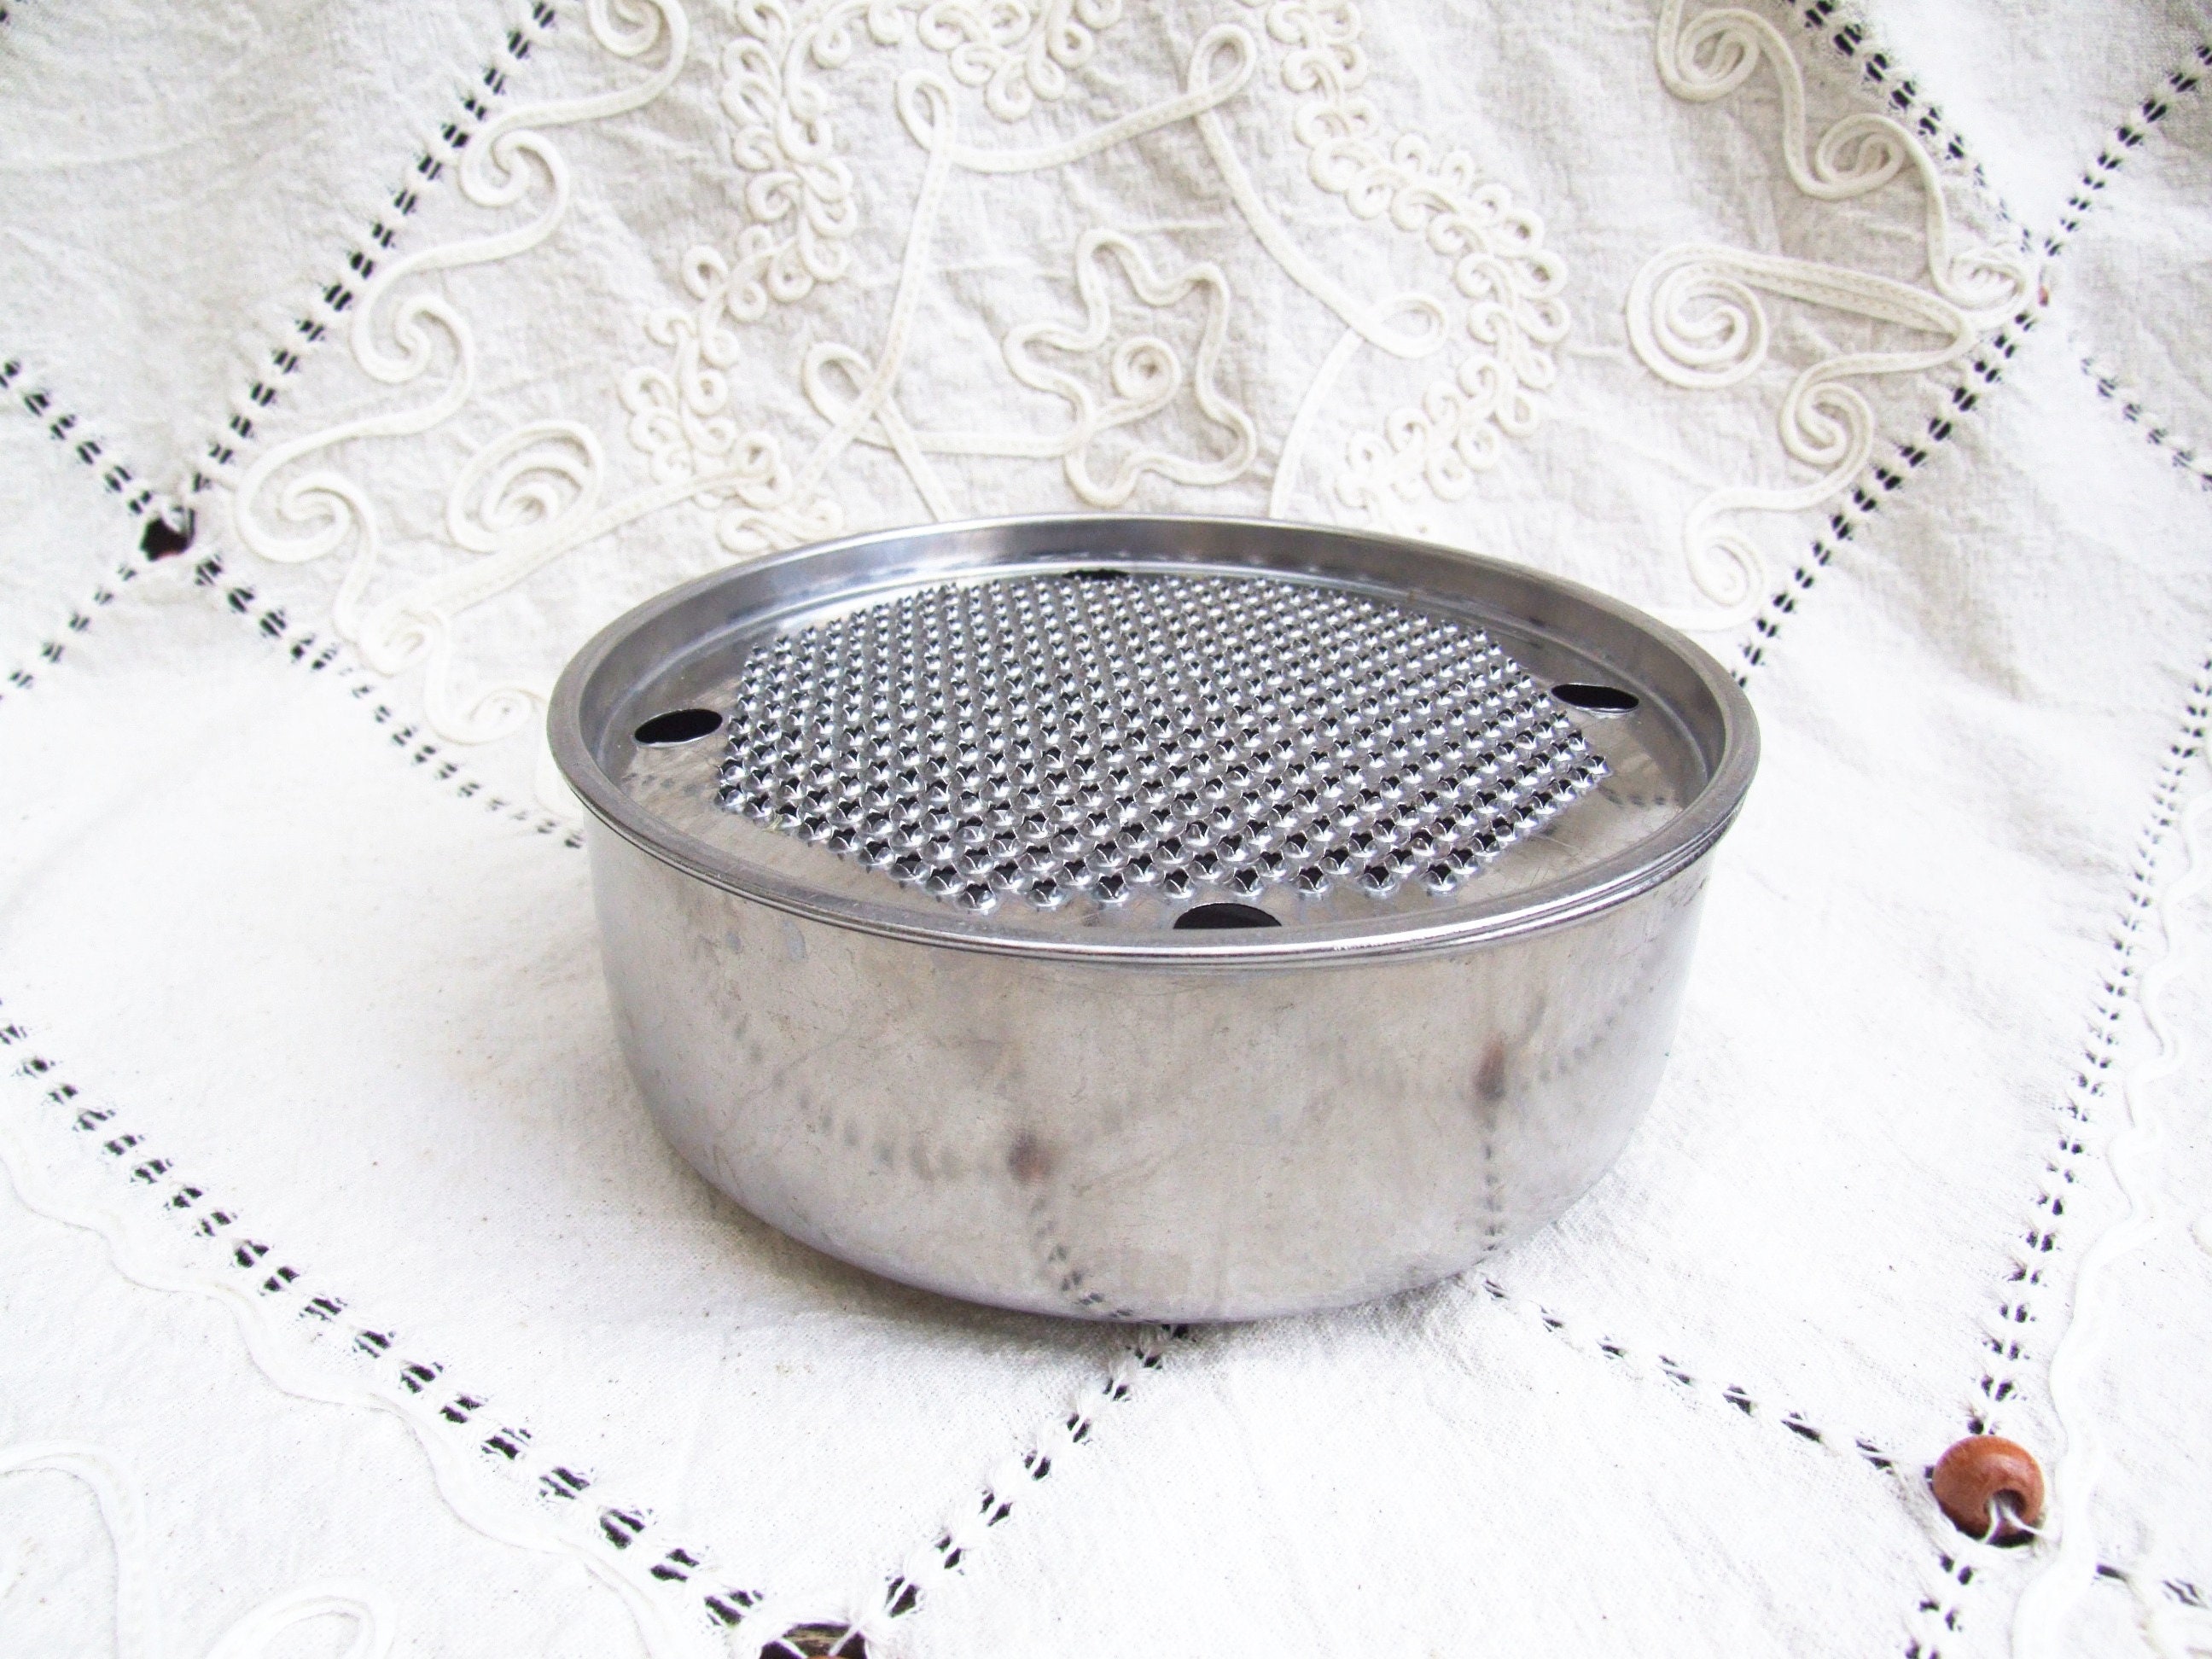 Vintage 1980s Italian Round Steel Cheese Grater Box for Parmesan Cheese.  Cheese Holder Bowl With Grater Lid, Quality of the Past 